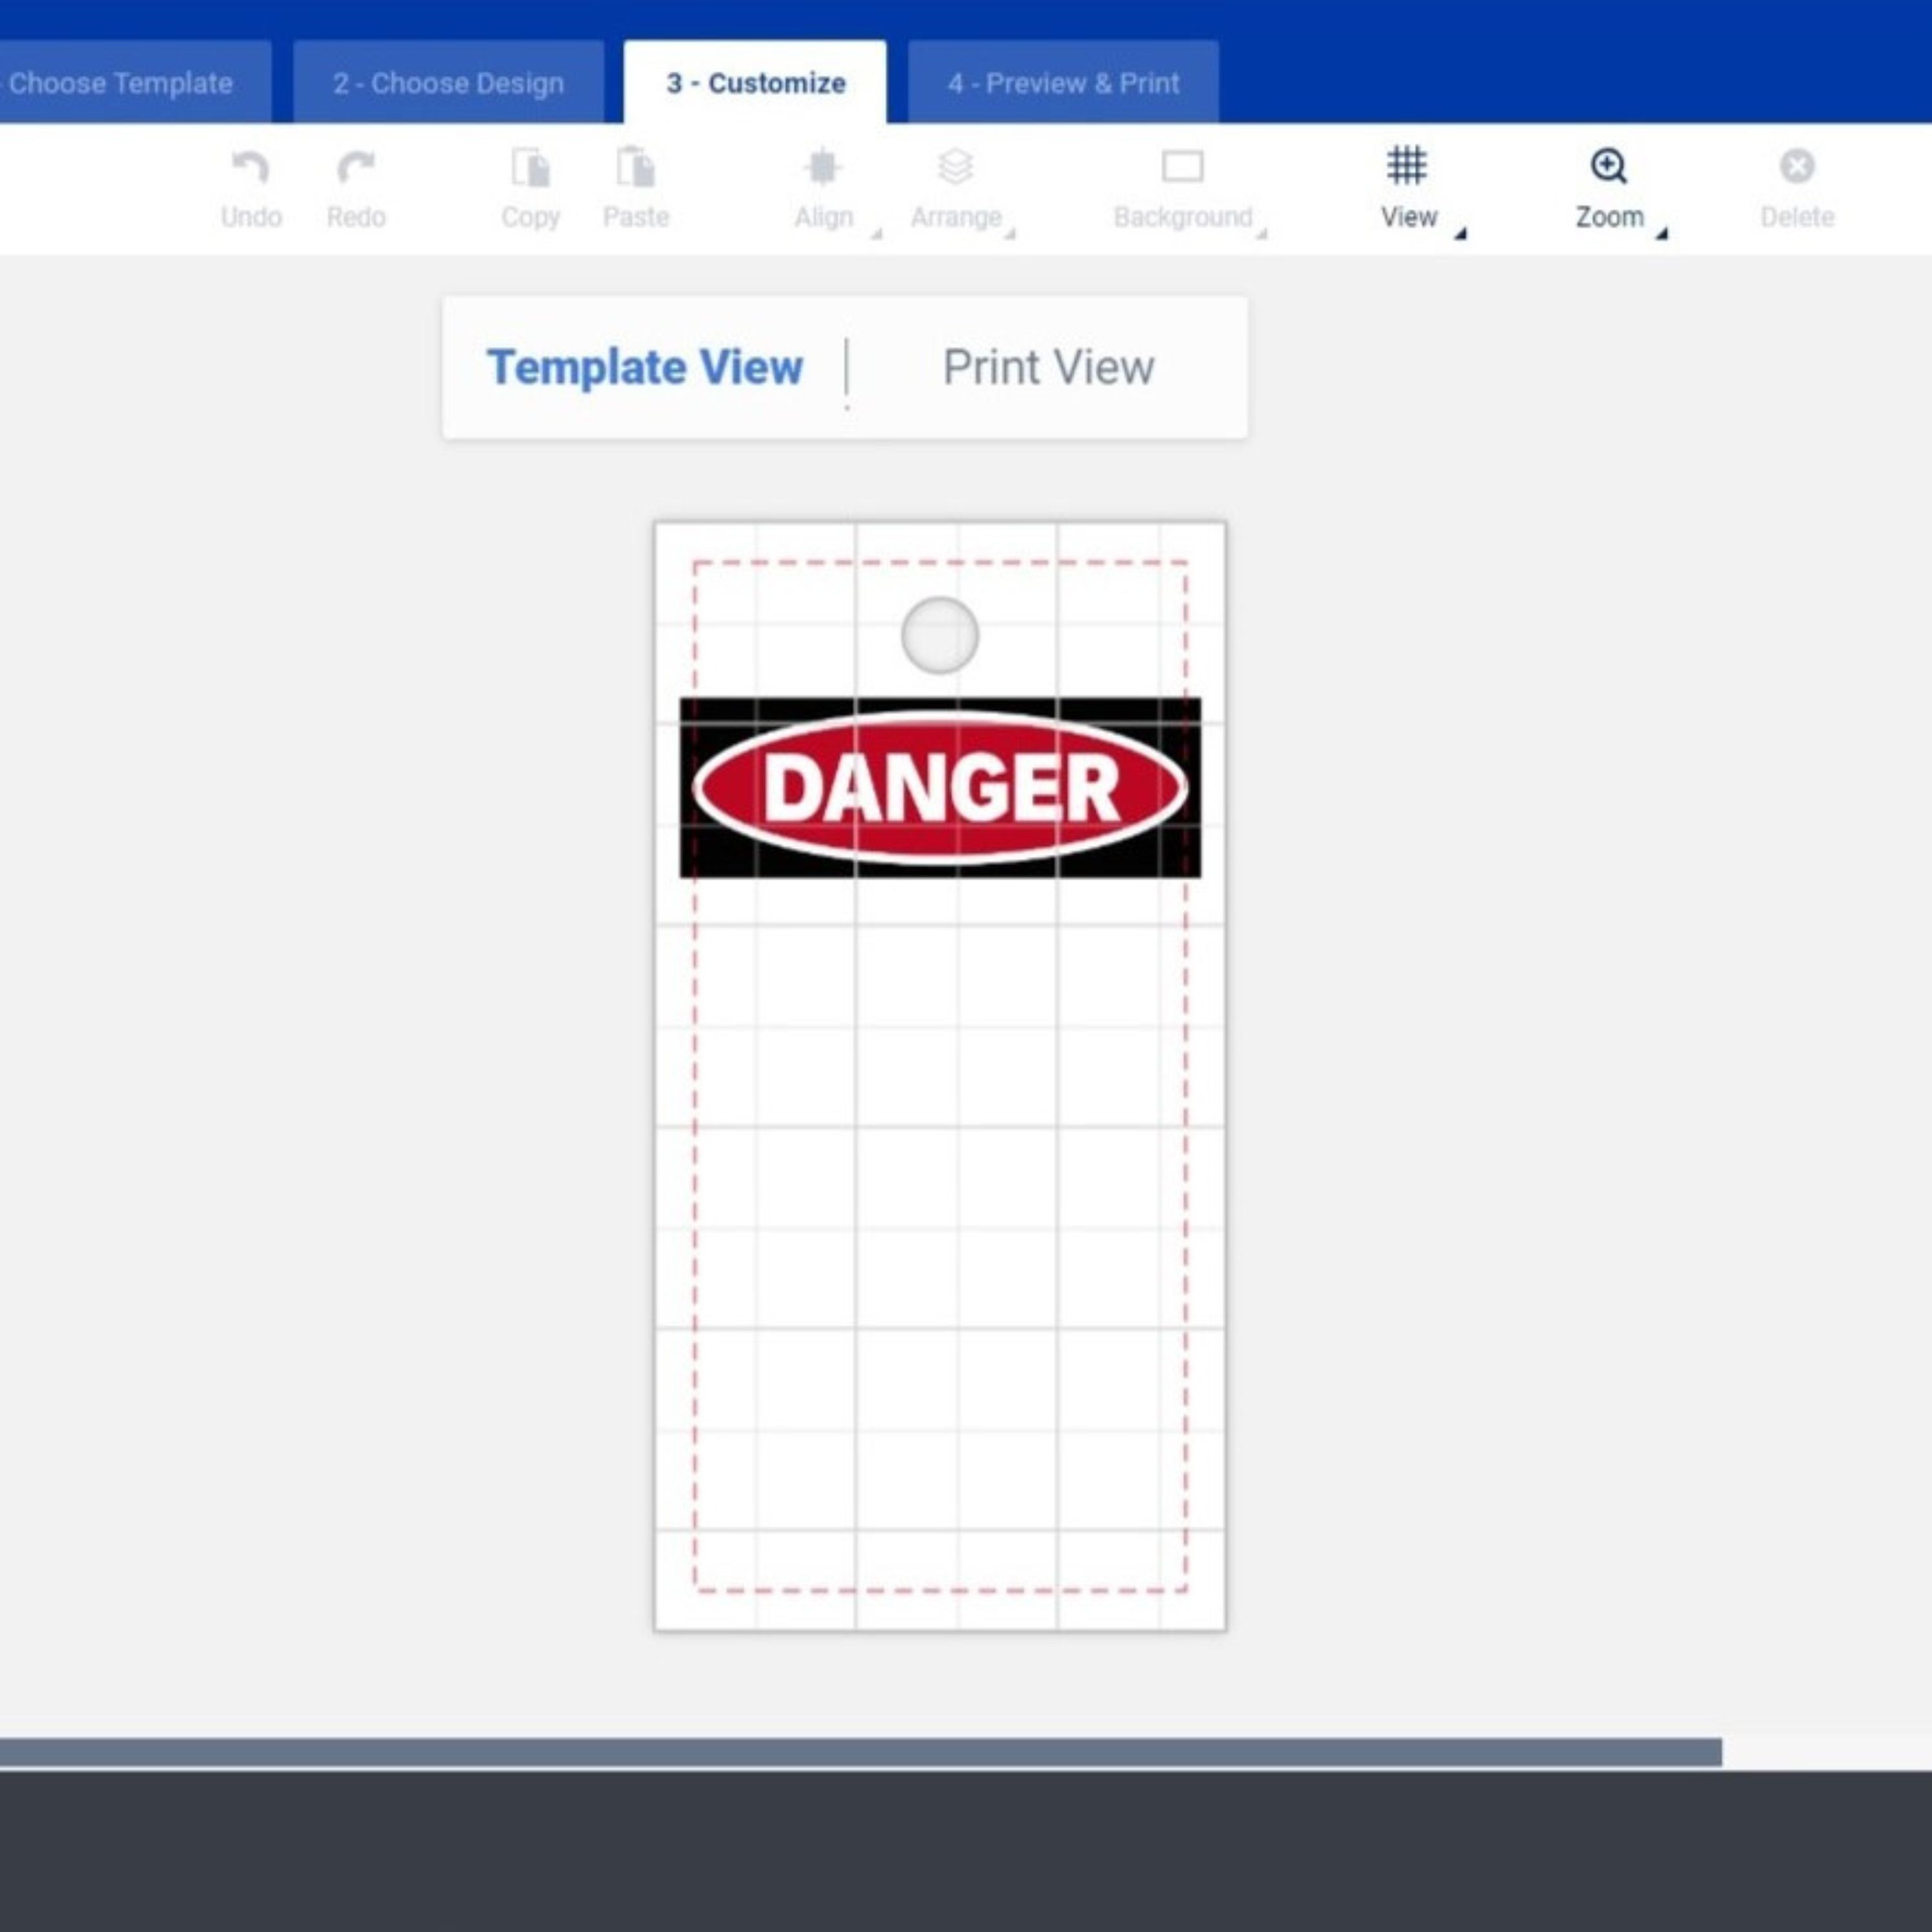 An example of what a blank template for Avery tags that come with a preprinted OSHA "Danger" header looks like  (Avery 62401). The screenshot shows that you use template view to design around where the preprinted header will be on the tag.